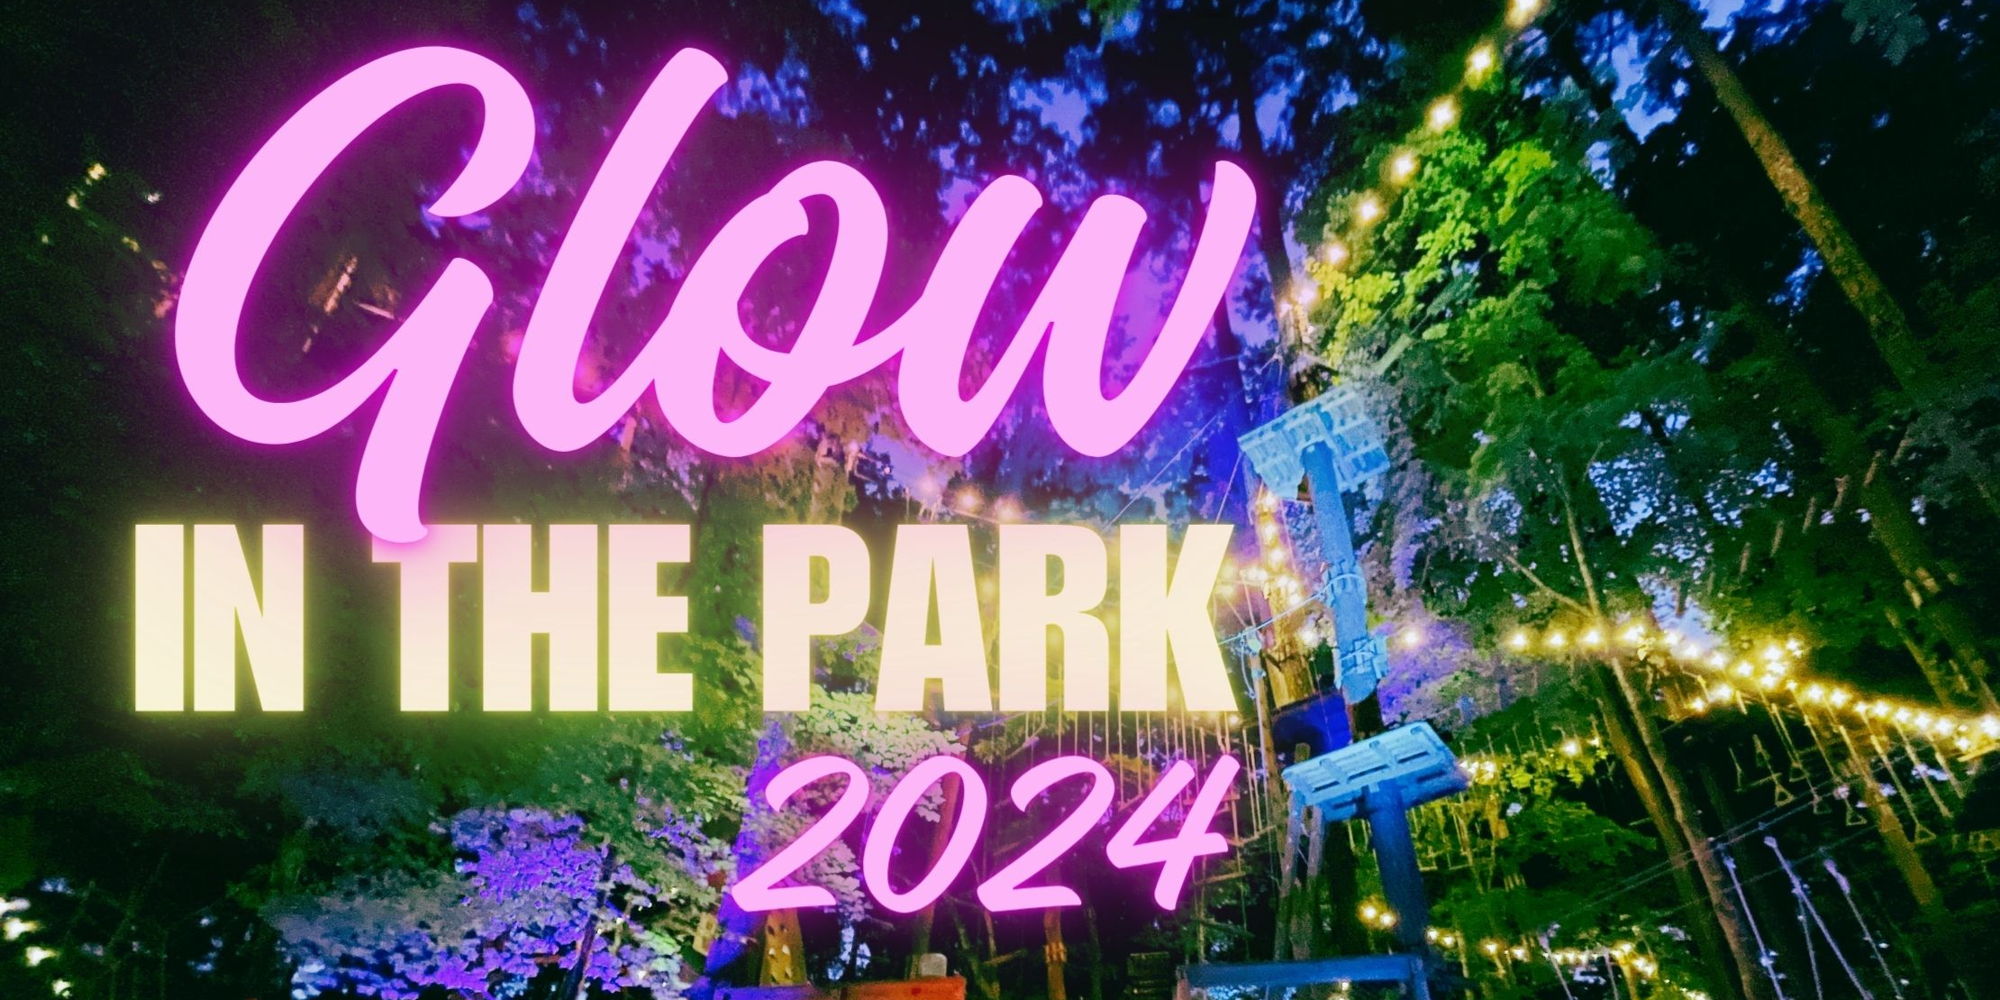 Glow in the Park at The Adventure Park at Long Island promotional image